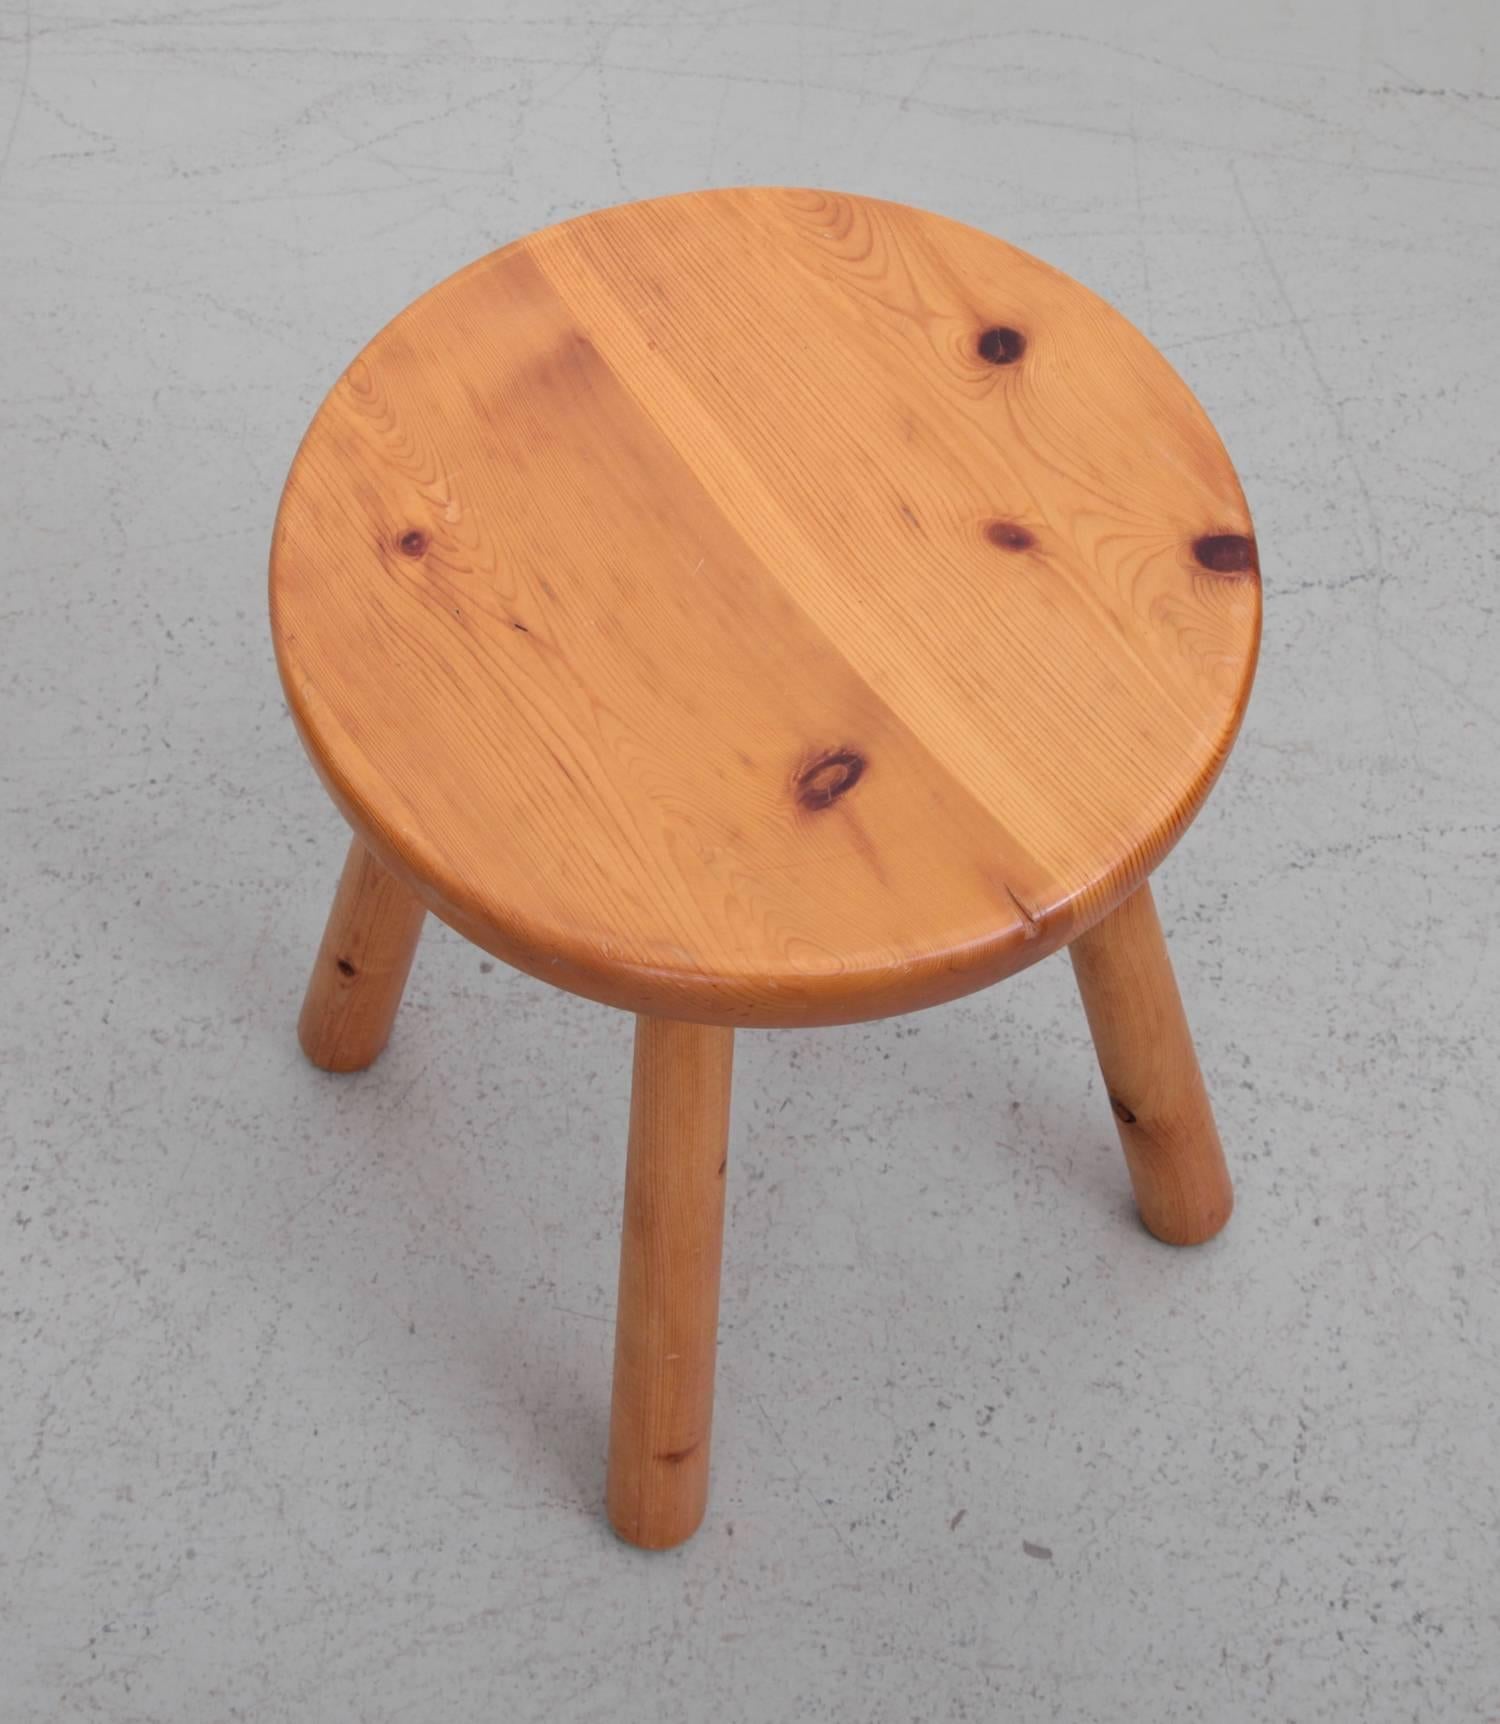 Beautiful strong solid pine Perriand stool in very good condition and a strong pine color!

Provenance: Alpine Station des Arcs, Savoie, France.

